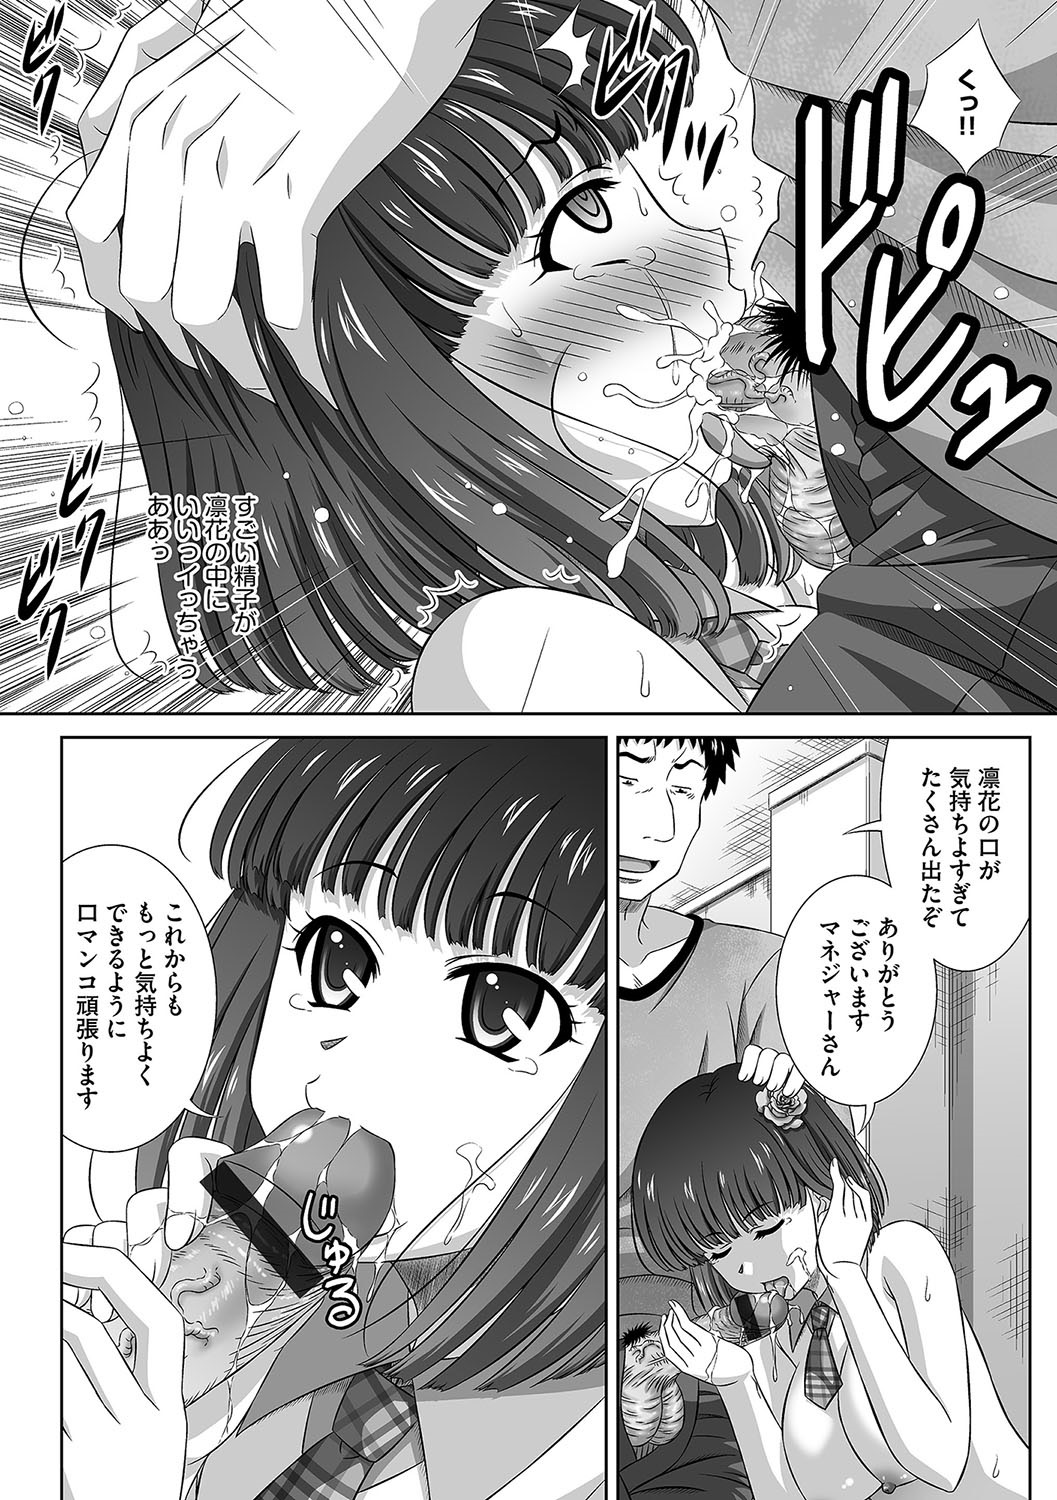 [Anthology] Cyberia Maniacs Saimin Choukyou Deluxe Vol. 006 [Digital] page 15 full